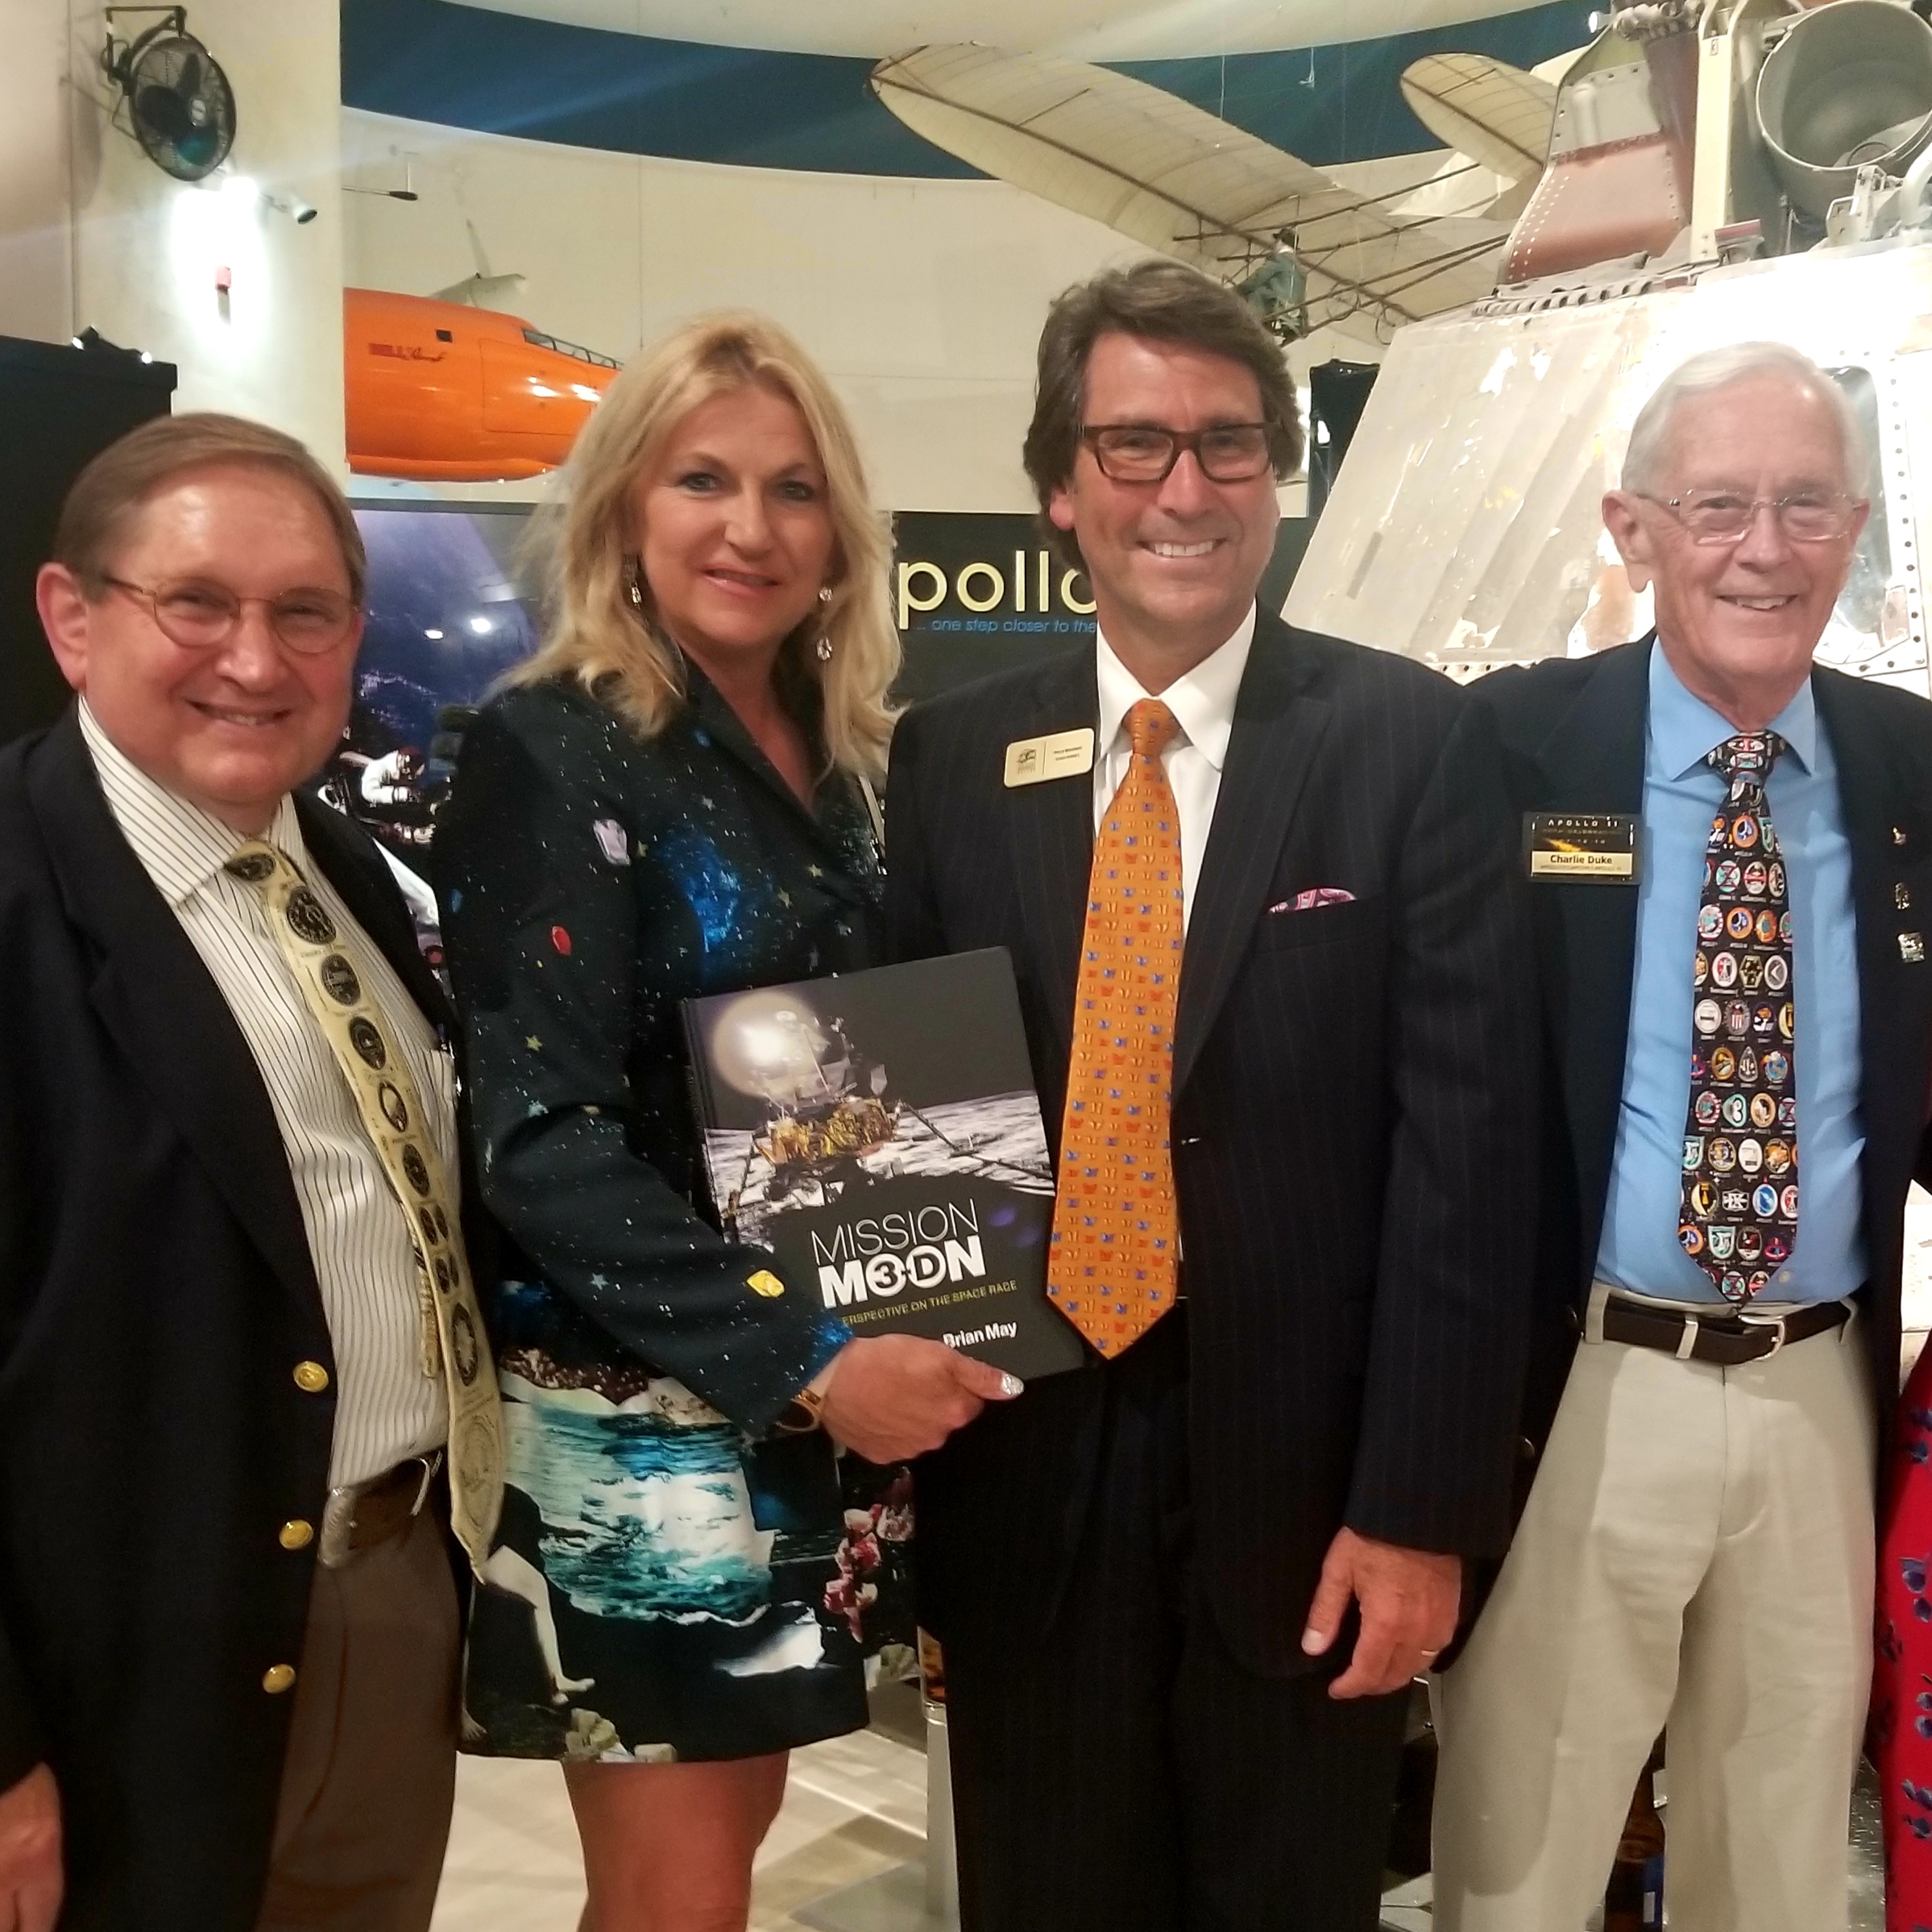 Dr. Perry and Judith Mansfield with Apollo 11, Charlie Duke, and CEO James Kidrick.